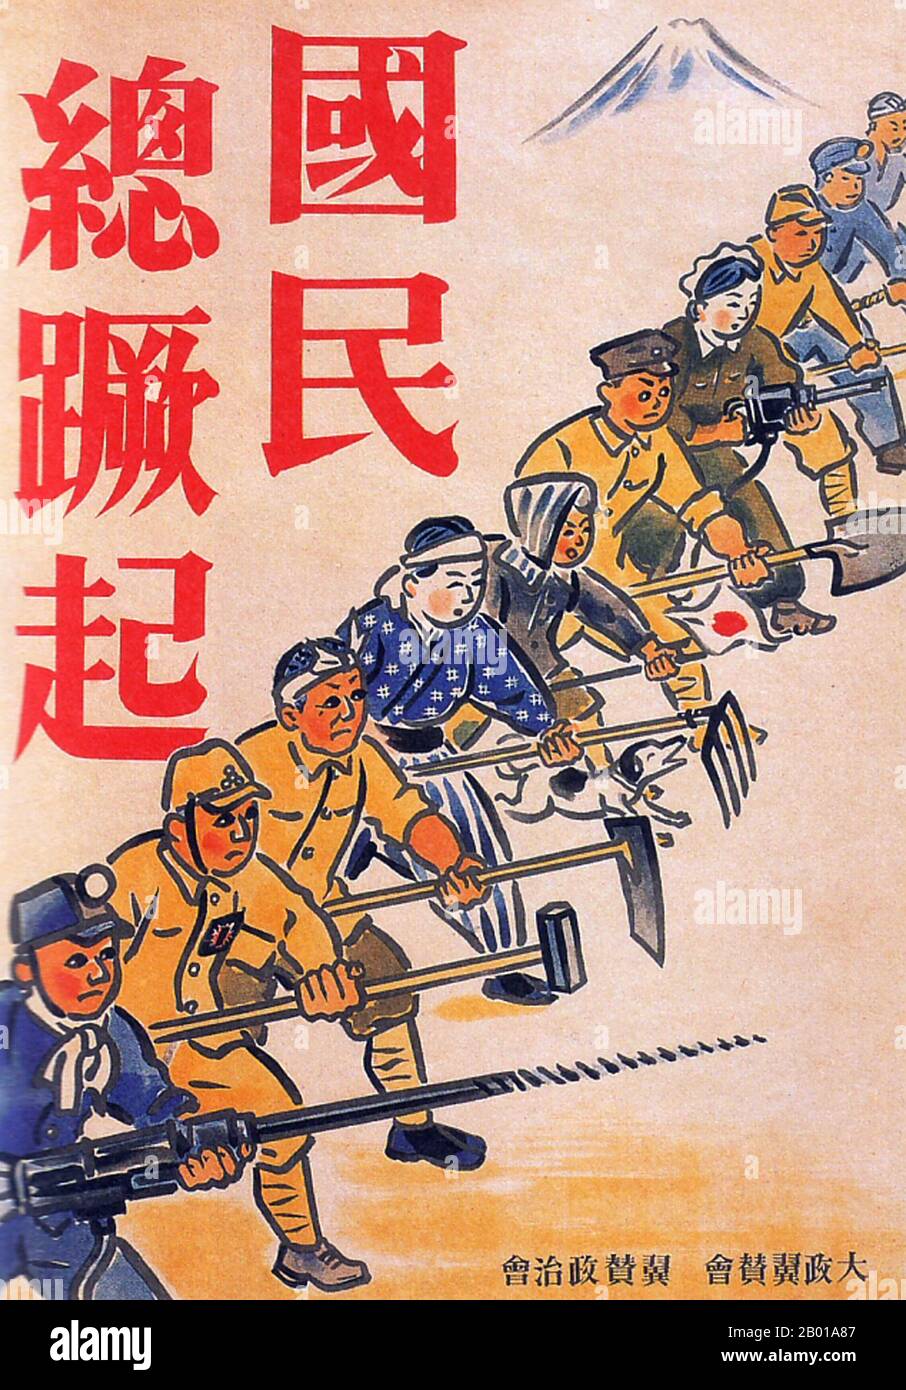 Japan: 'Rise, All Japanese Citizens!', Imperial Rule Assistance Association, 1940.  During late 1920s and 1930s Japan, a new poster style developed that reflected the growing influence of the masses in Japanese society. These art posters were strongly influenced by the emerging political forces of Communism and Fascism in Europe and the Soviet Union, adopting a style that incorporated bold slogans with artistic themes ranging from Leftist socialist realism through Stateism and state-directed public welfare, to Militarism and Imperialist expansionism. Stock Photo